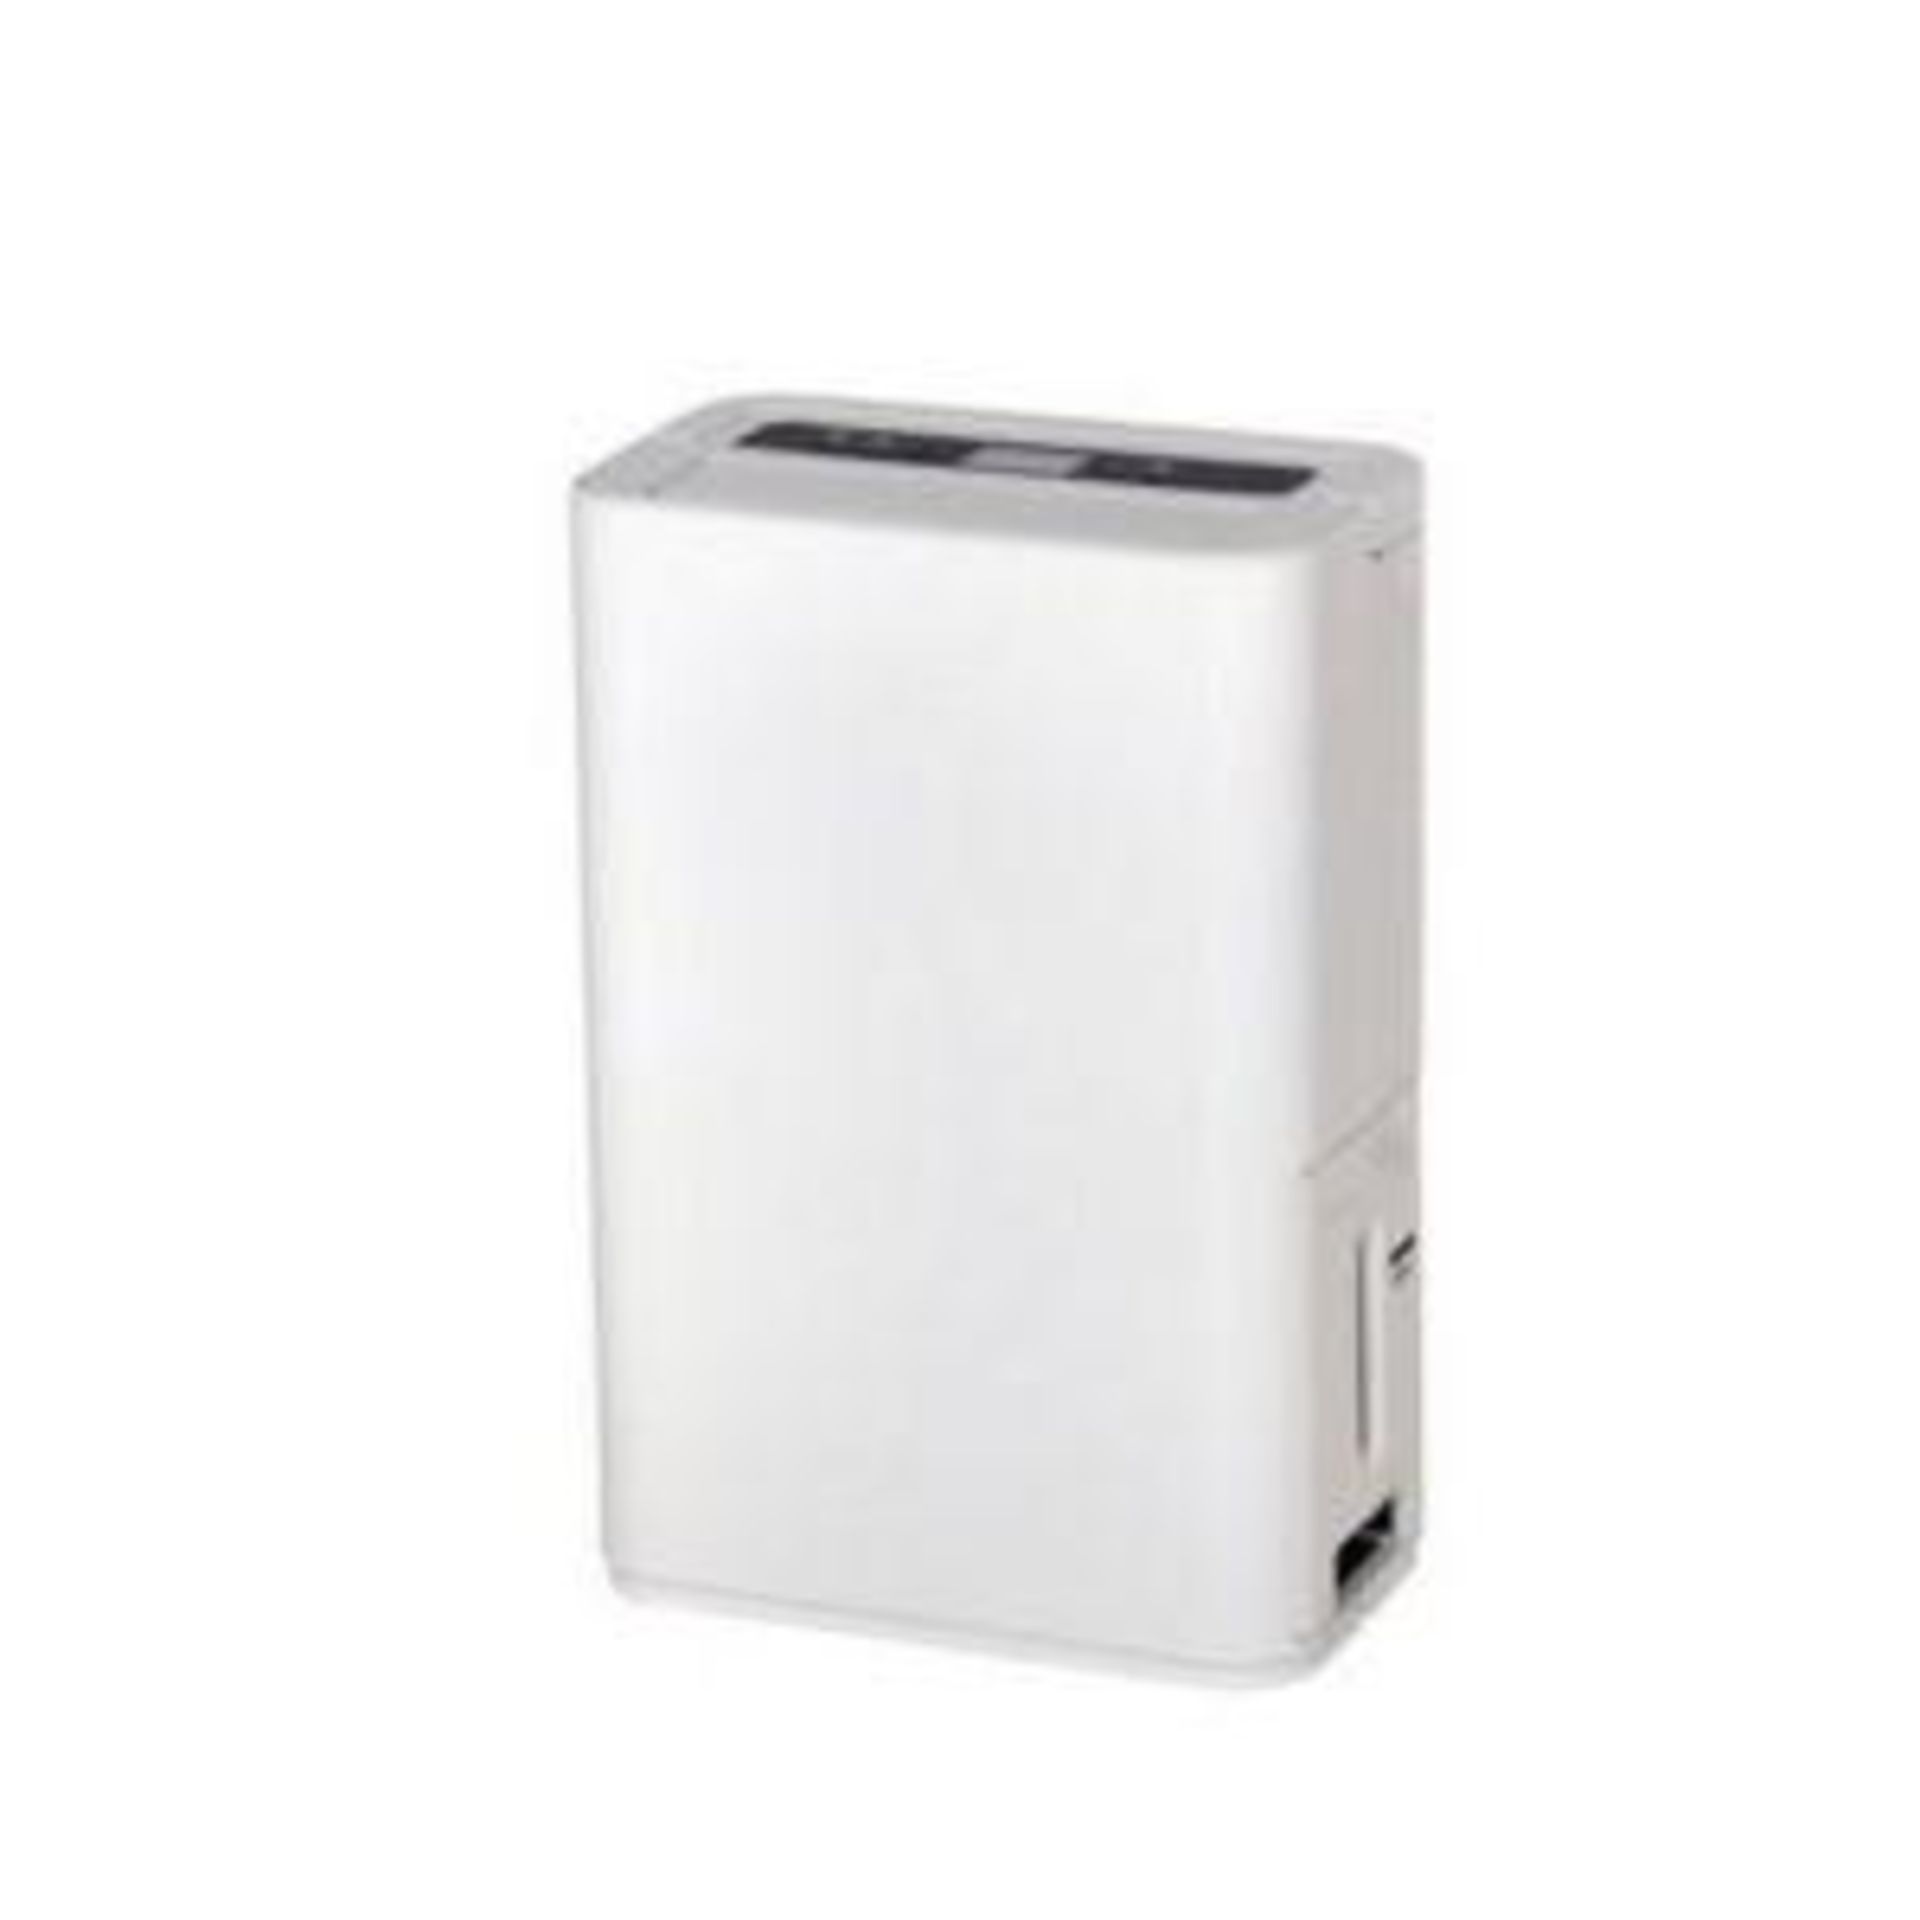 Blyss Corded Electric Dehumidifier 2 Speed WDH-316DB 16Ltr 280W 240V - SR52.Ideal for removing